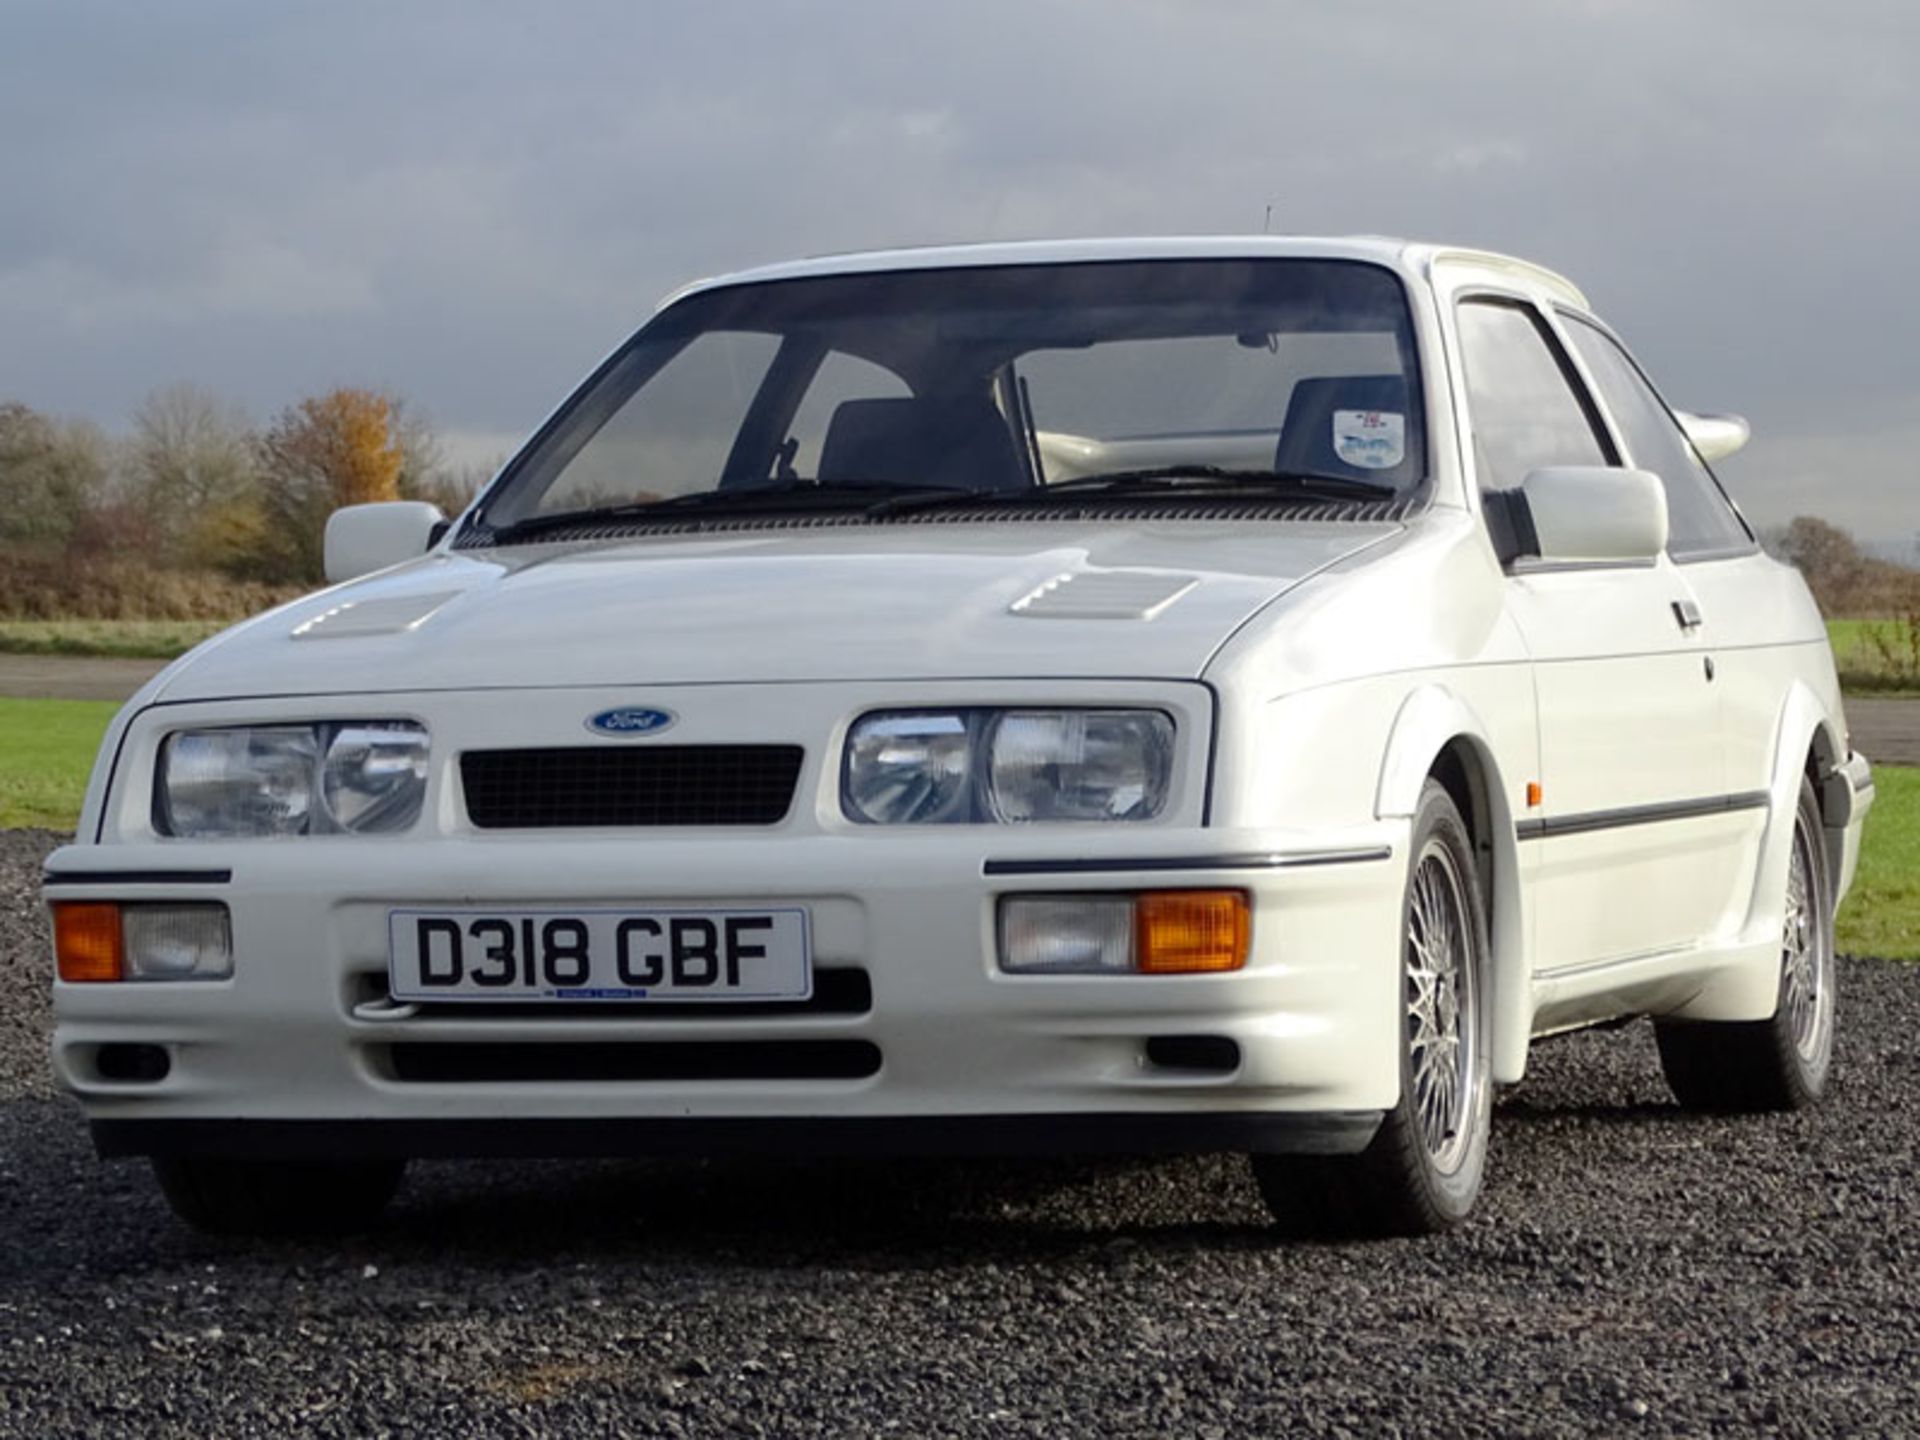 1987 Ford Sierra RS Cosworth - Image 2 of 11